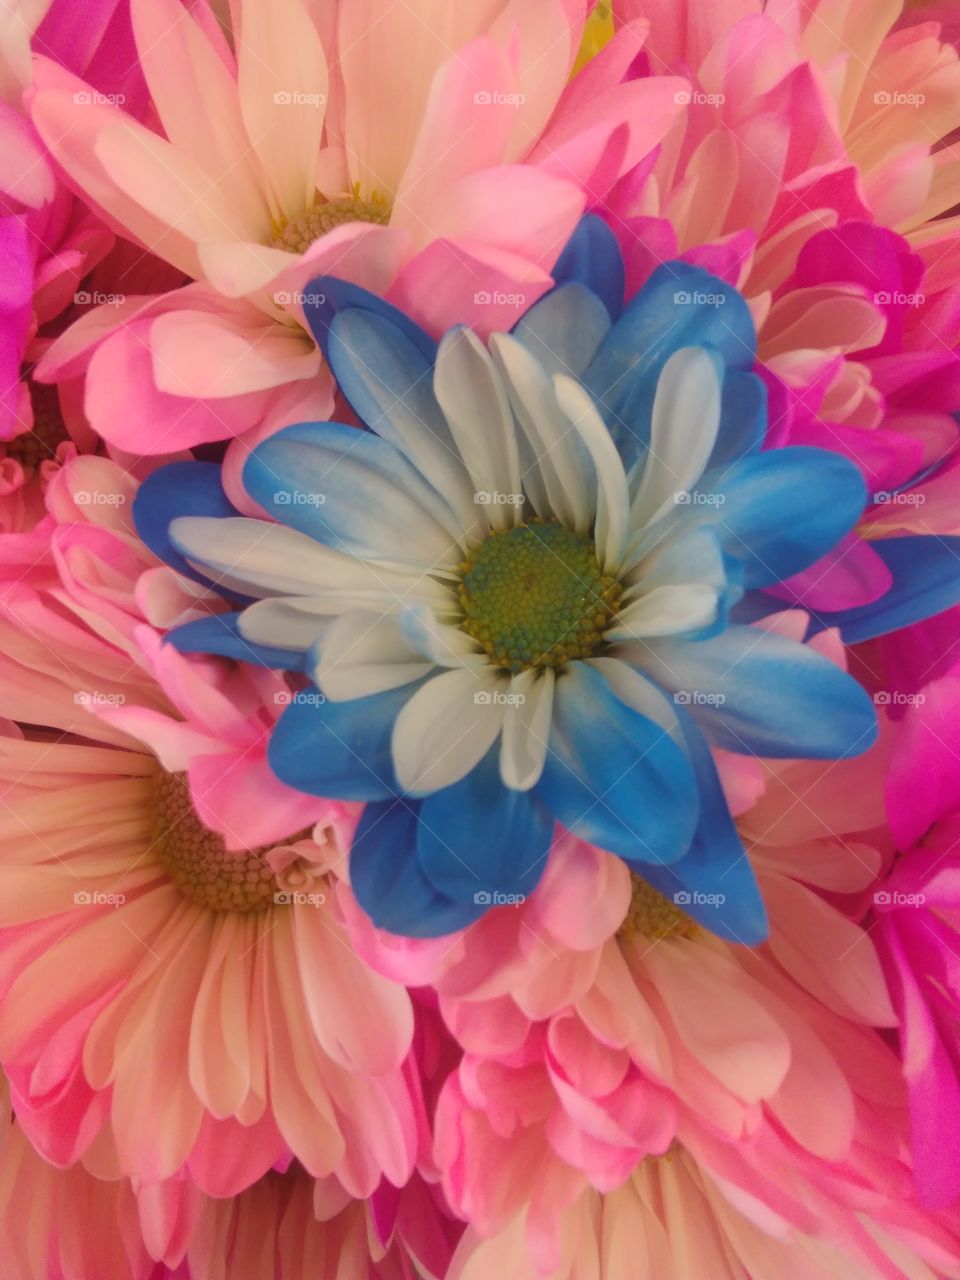 blue flower standing in a bouquet of pink flowers